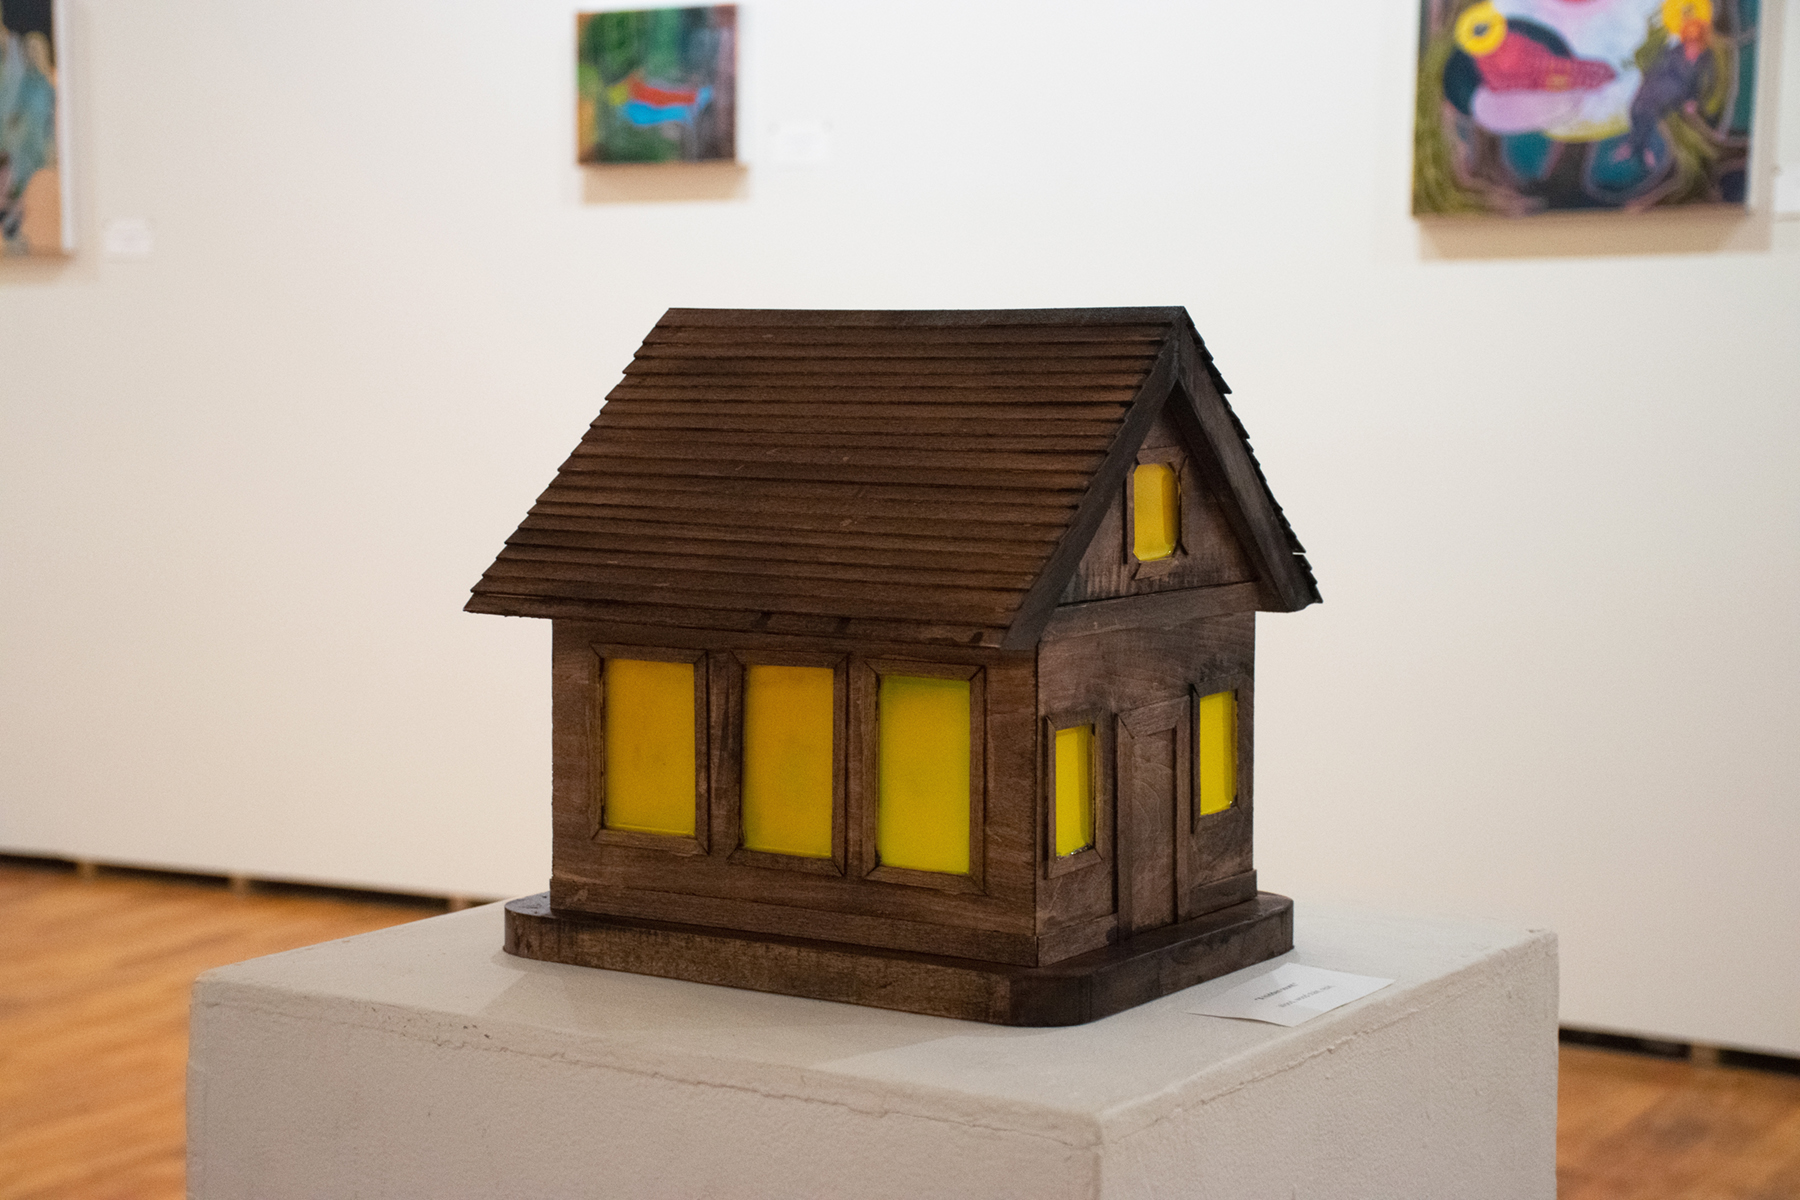 A model house made of white with the windows covered with yellow paint